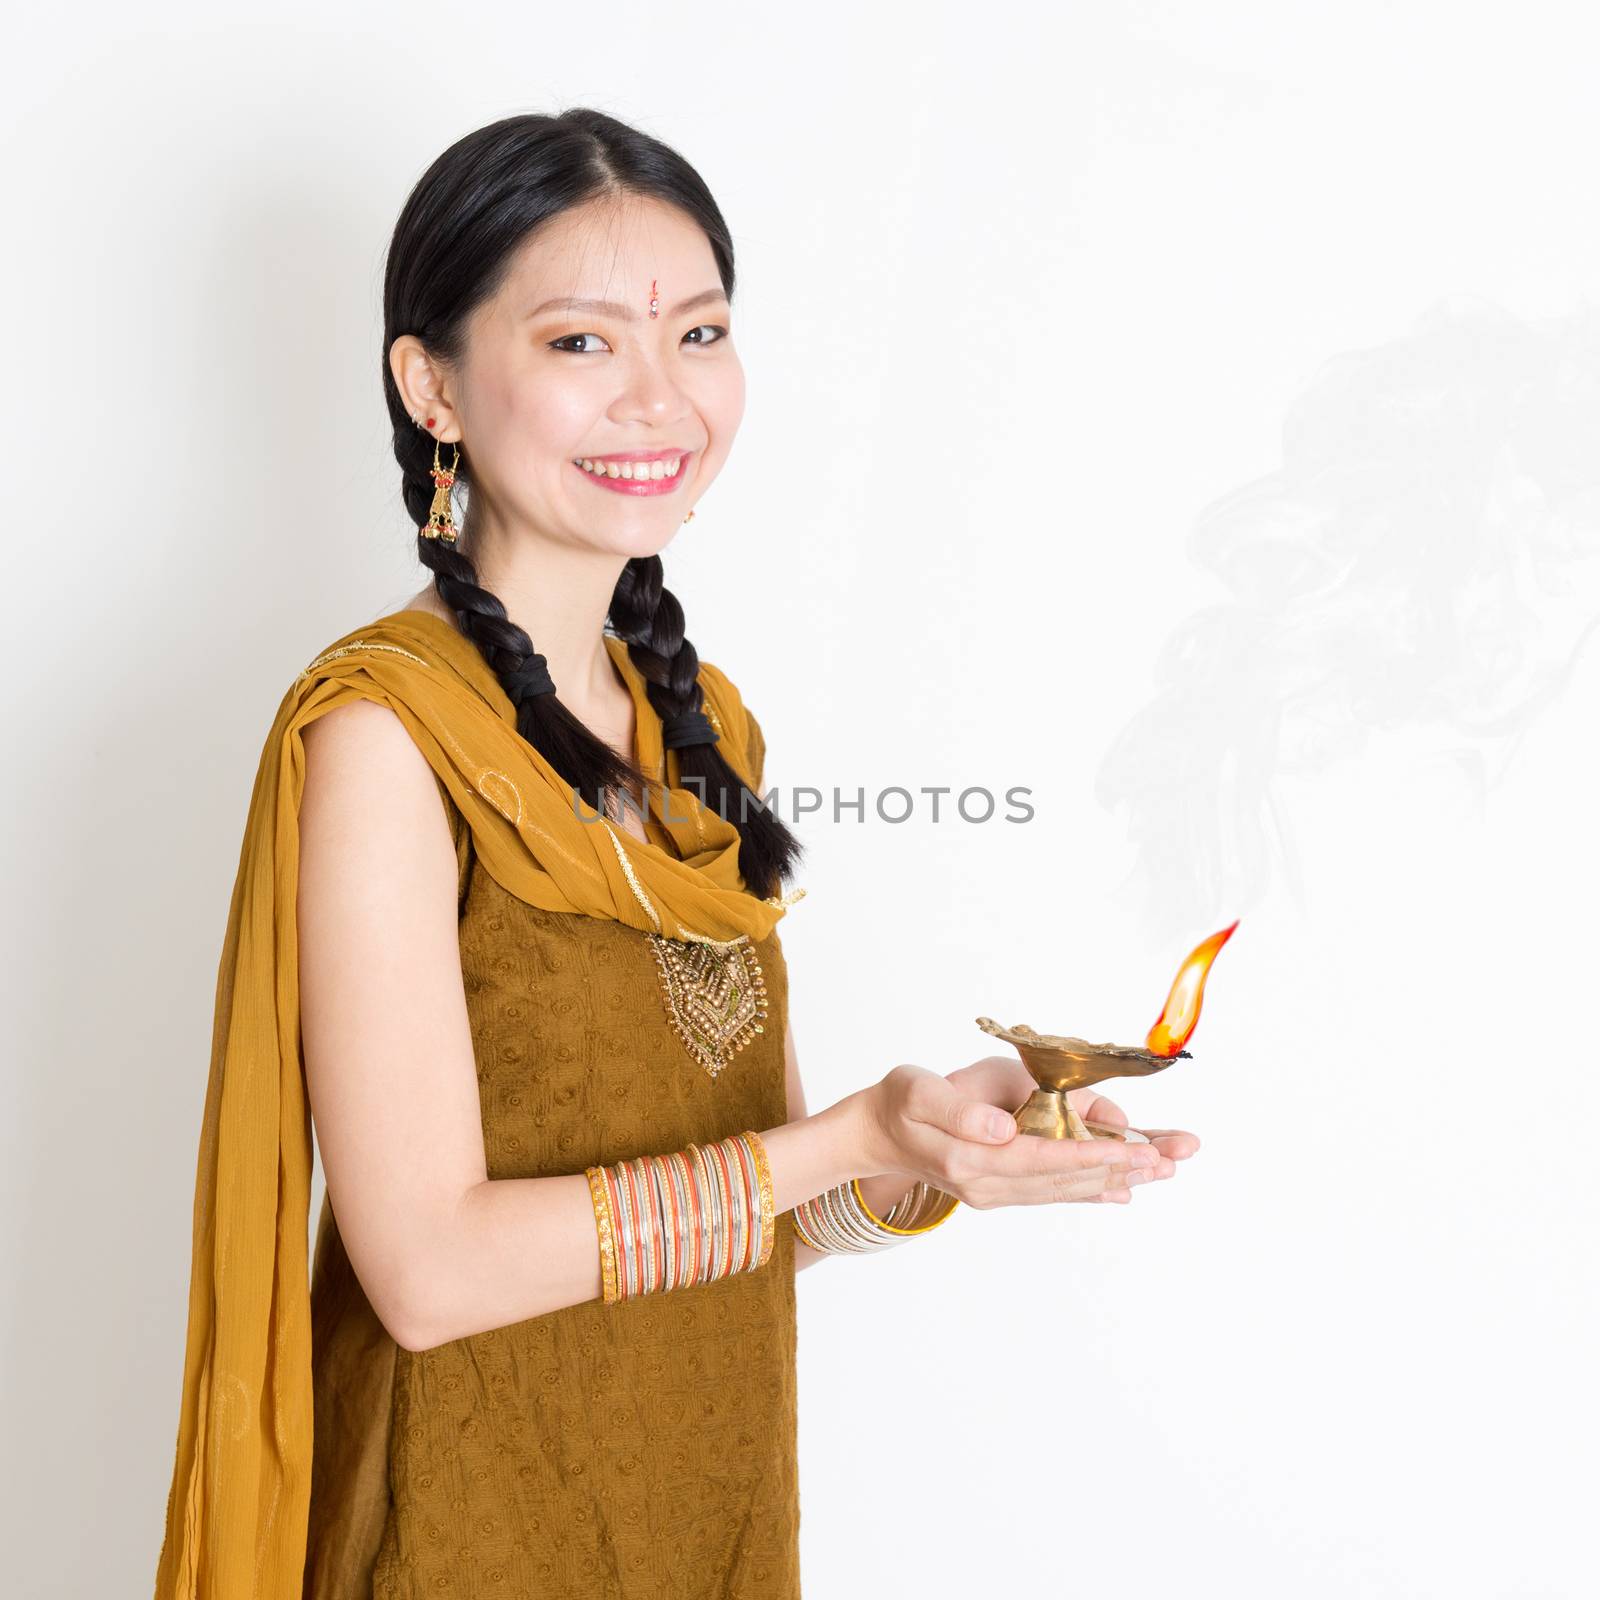 Mixed race Indian Chinese girl in traditional dress hands holding diya oil lamp and celebrating Diwali or deepavali, fesitval of lights.